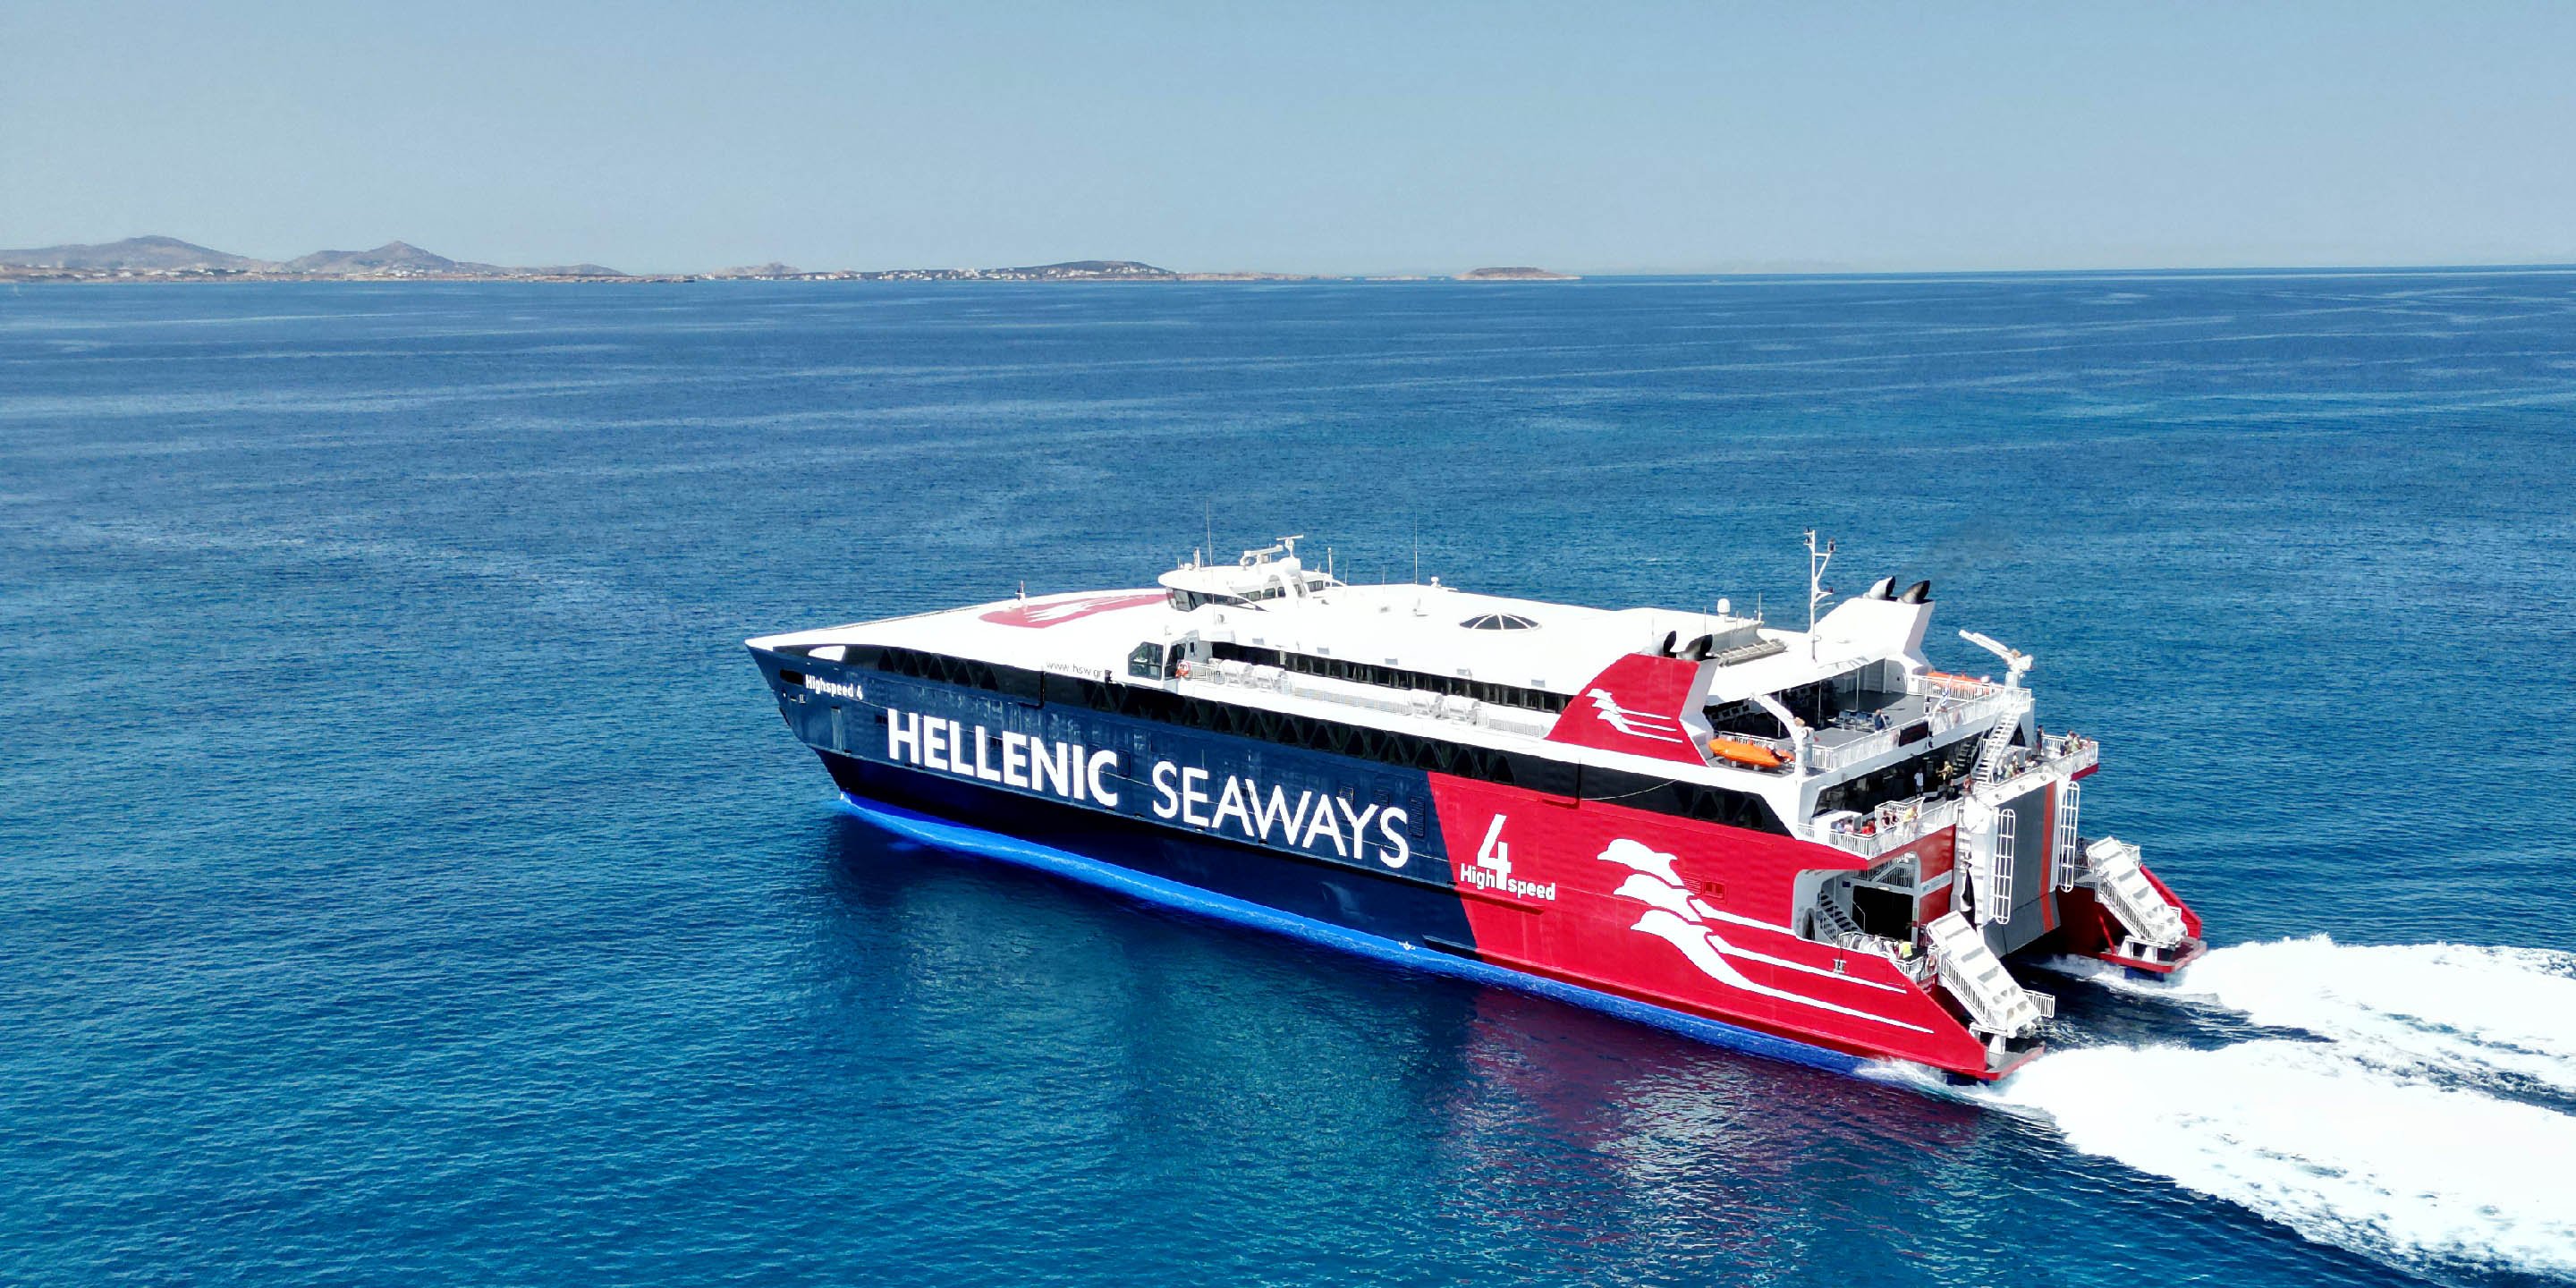 The high-speed ferry Highspeed 4 of Hellenic seaways leaving the port of Naxos for Paros